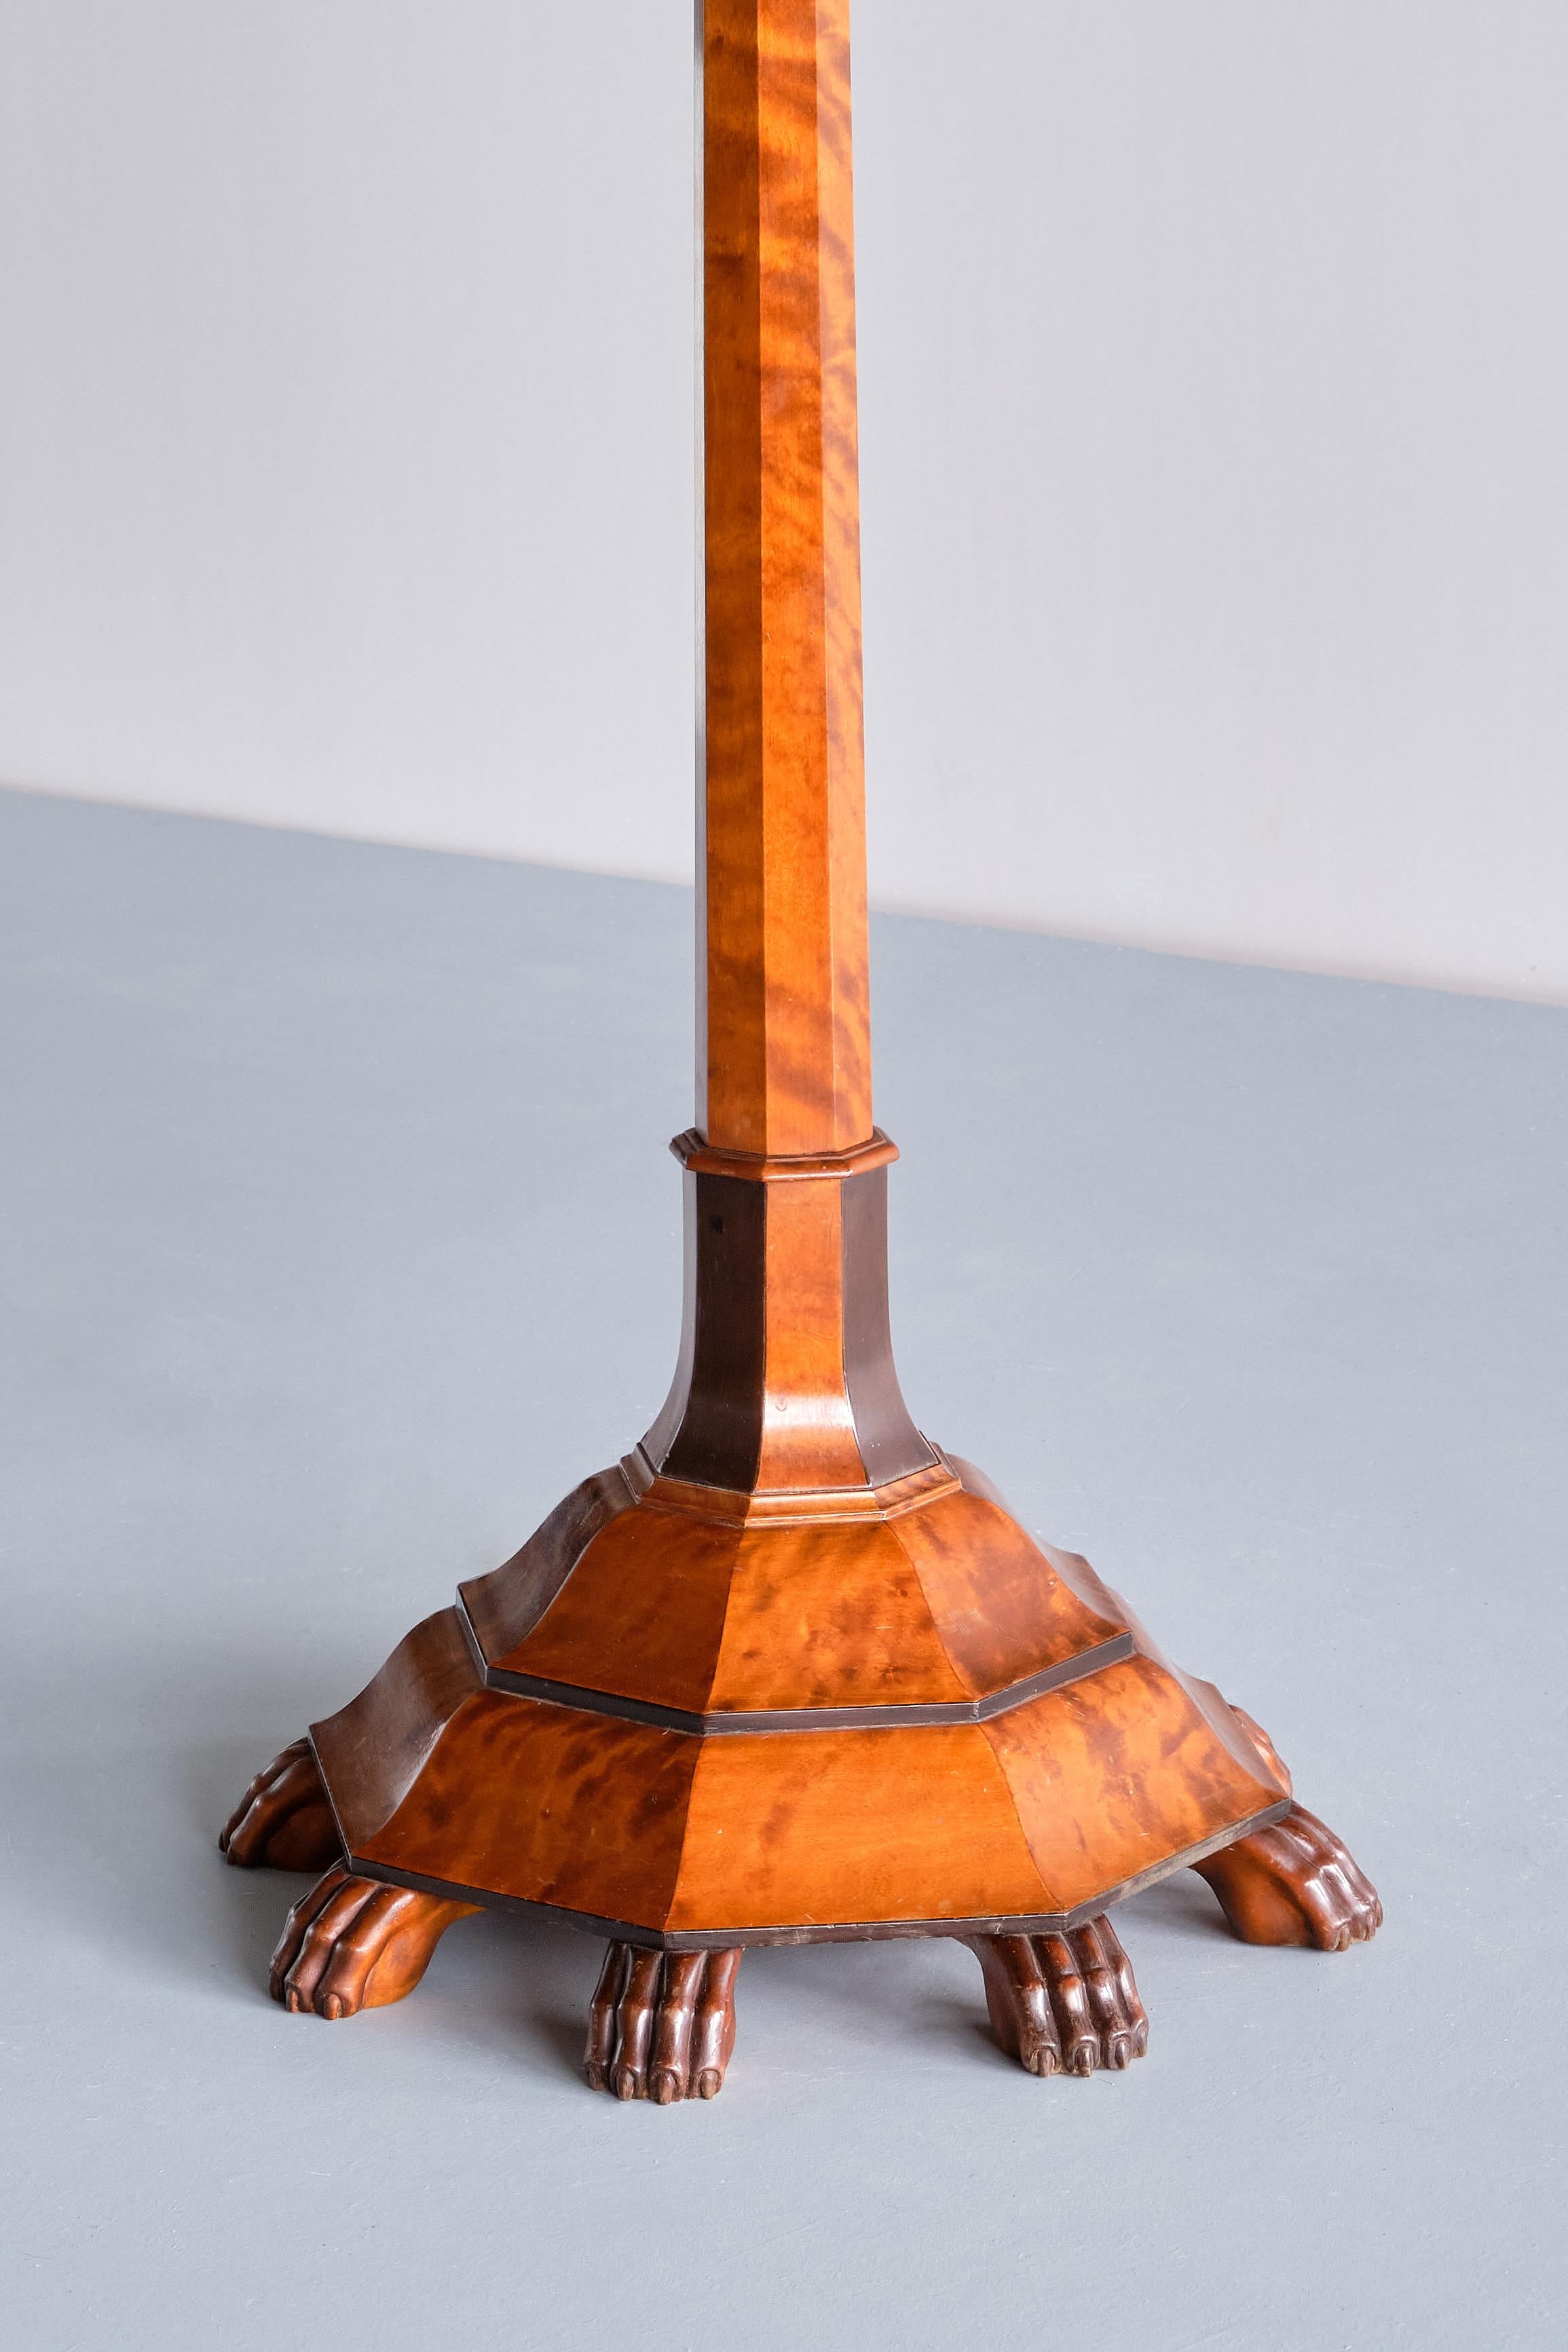 Exceptional Swedish Grace Floor Lamp in Birch with Carved Paw Feet, 1920s For Sale 2